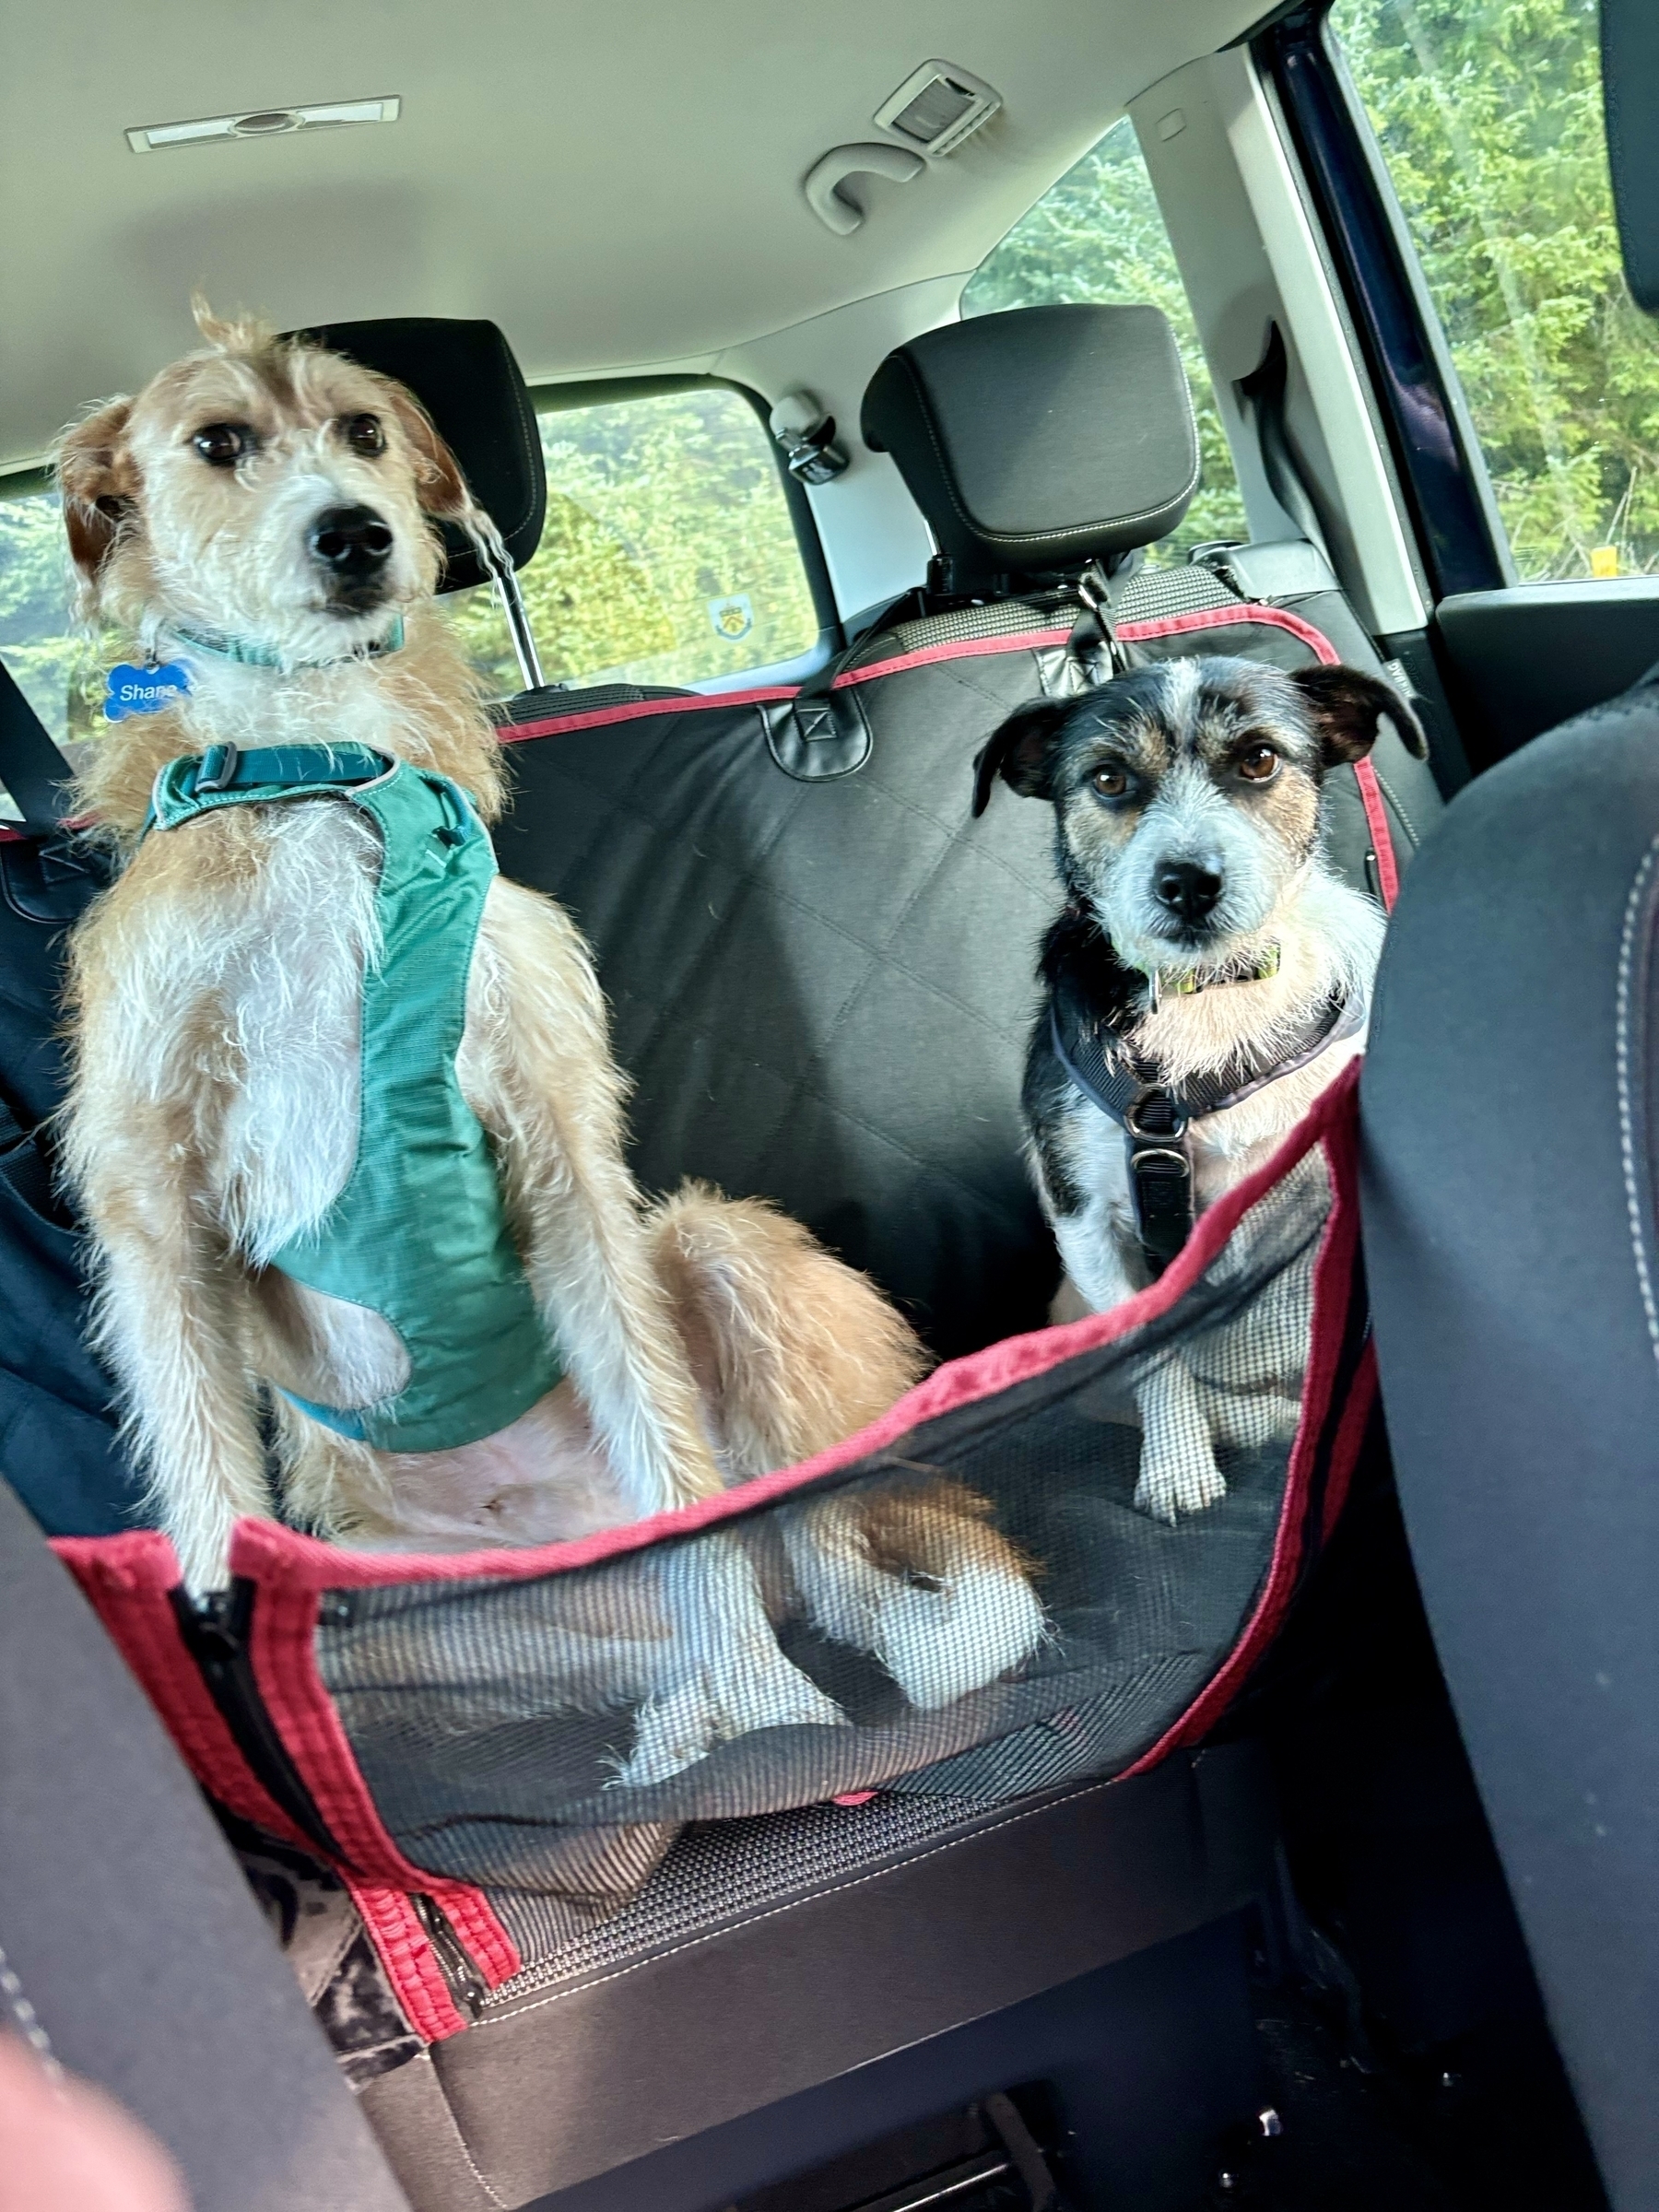 Shane the lurcher and Leela the terrier sit, unimpressed, in the back of a car. 